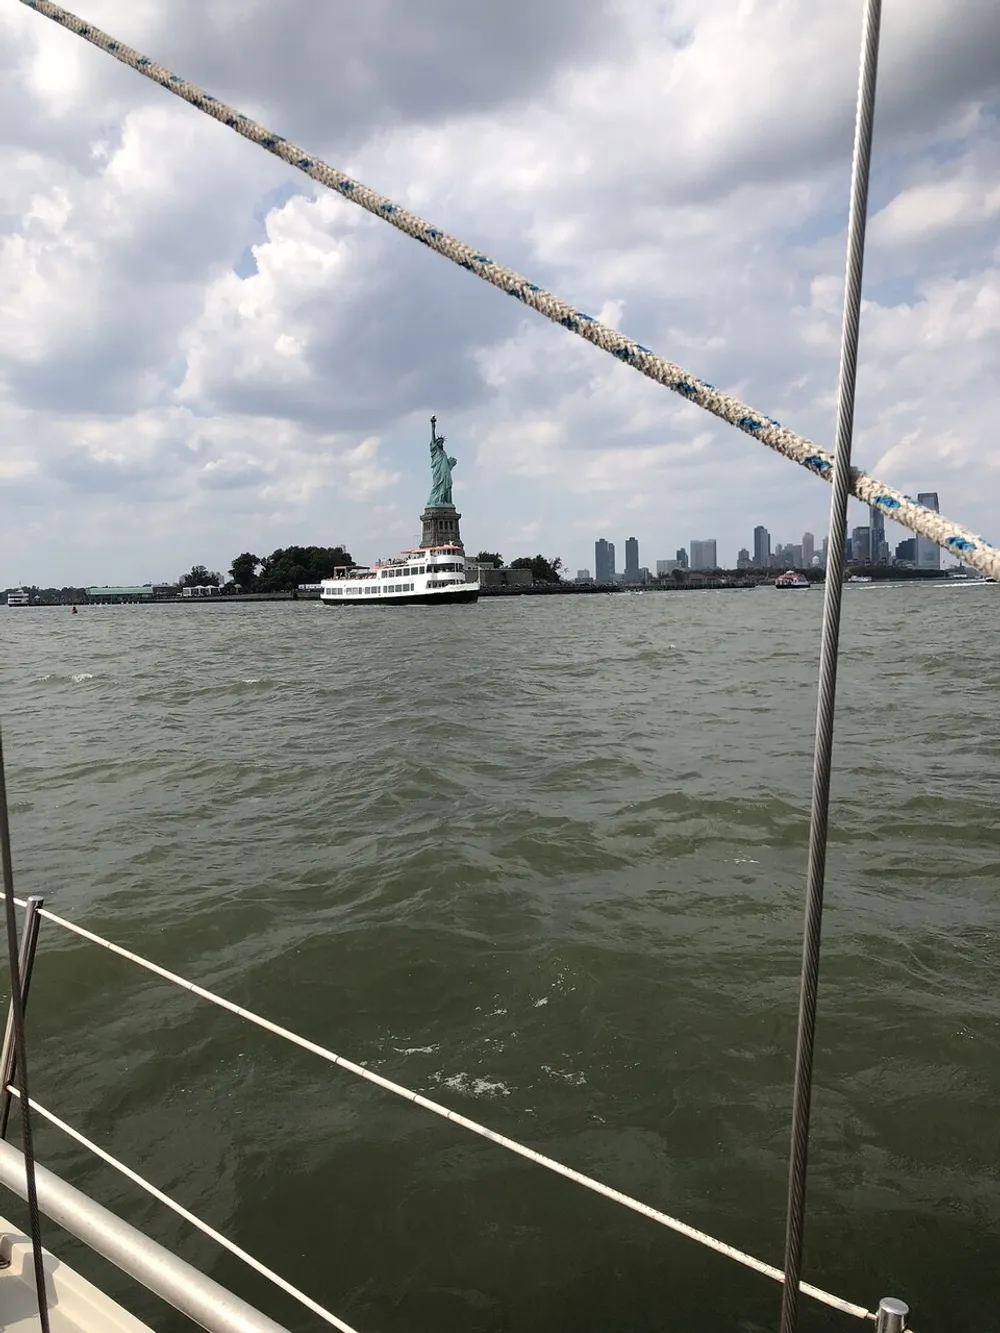 The image shows a view from a boat featuring the Statue of Liberty and a ferry with the New York City skyline in the background framed by ropes from the boats rigging